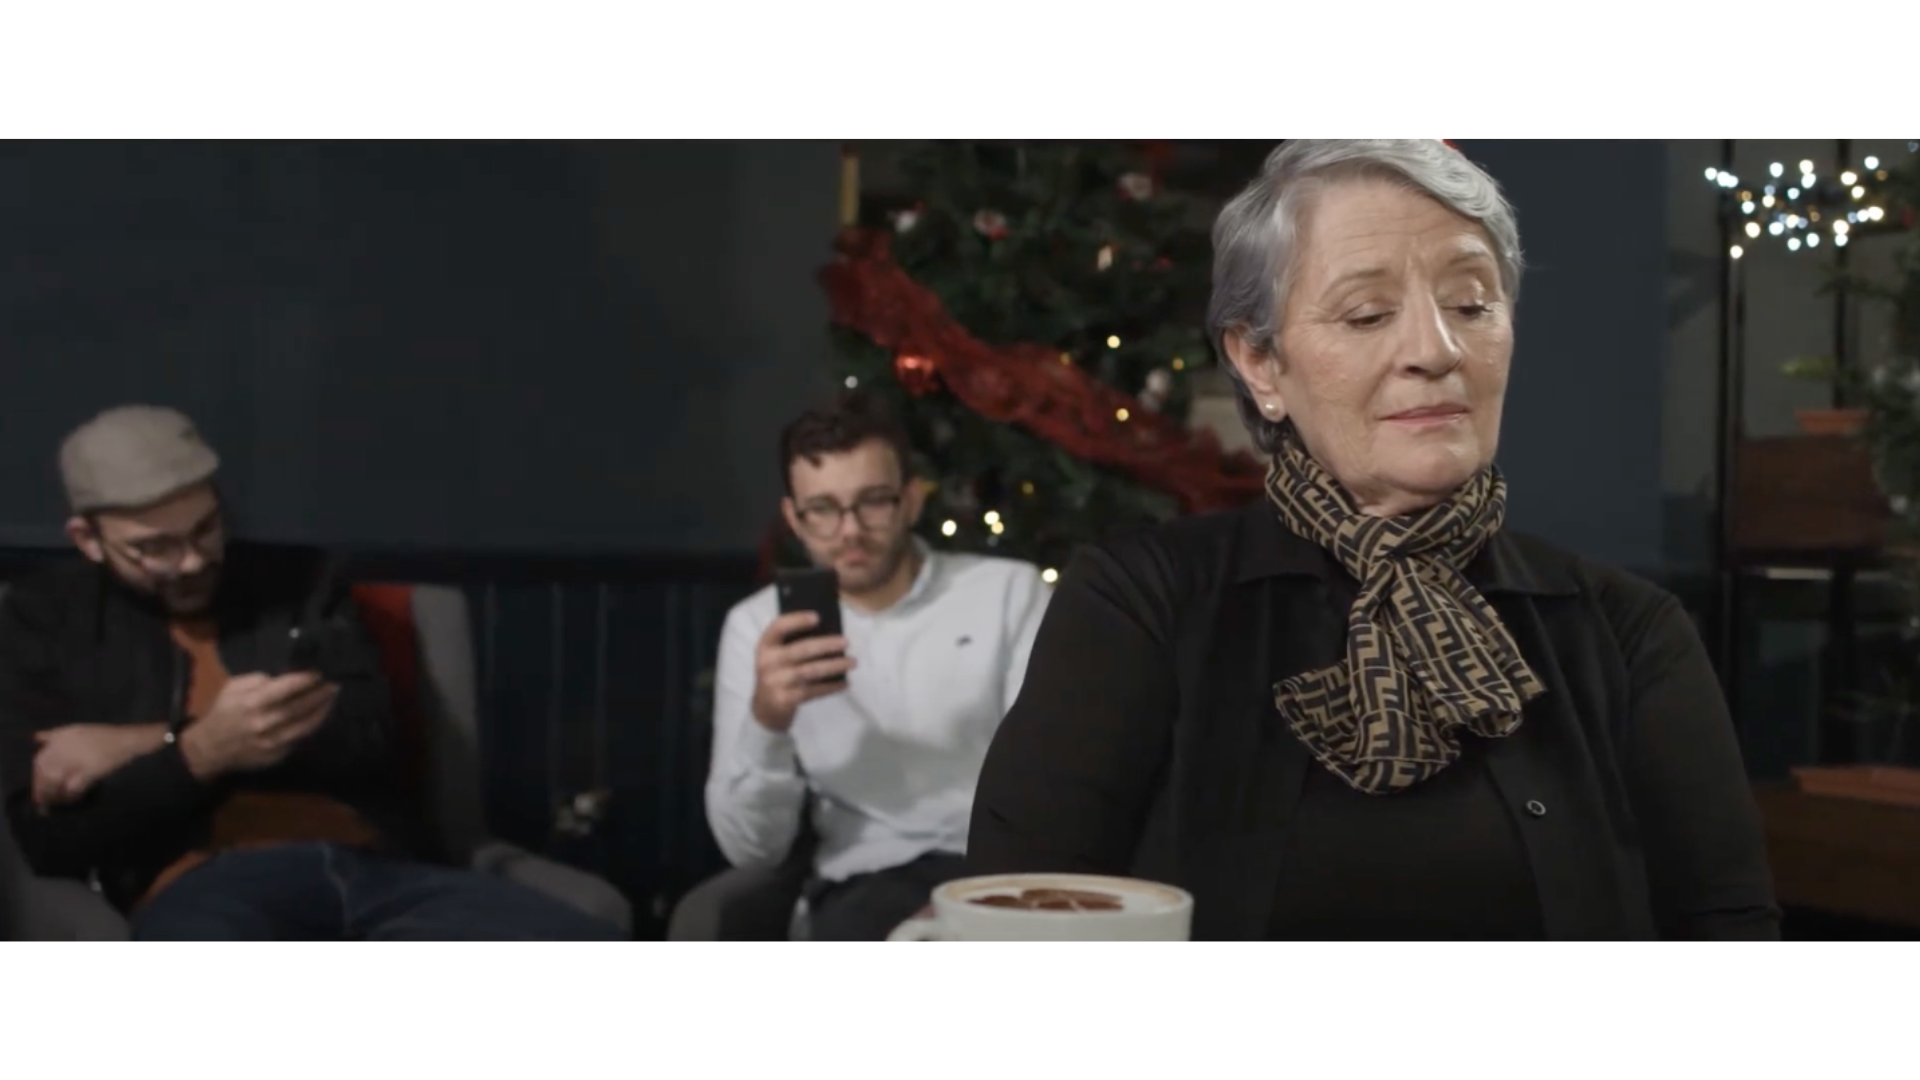 grandmother looking disappointed and in the background there are 2 men on their phone